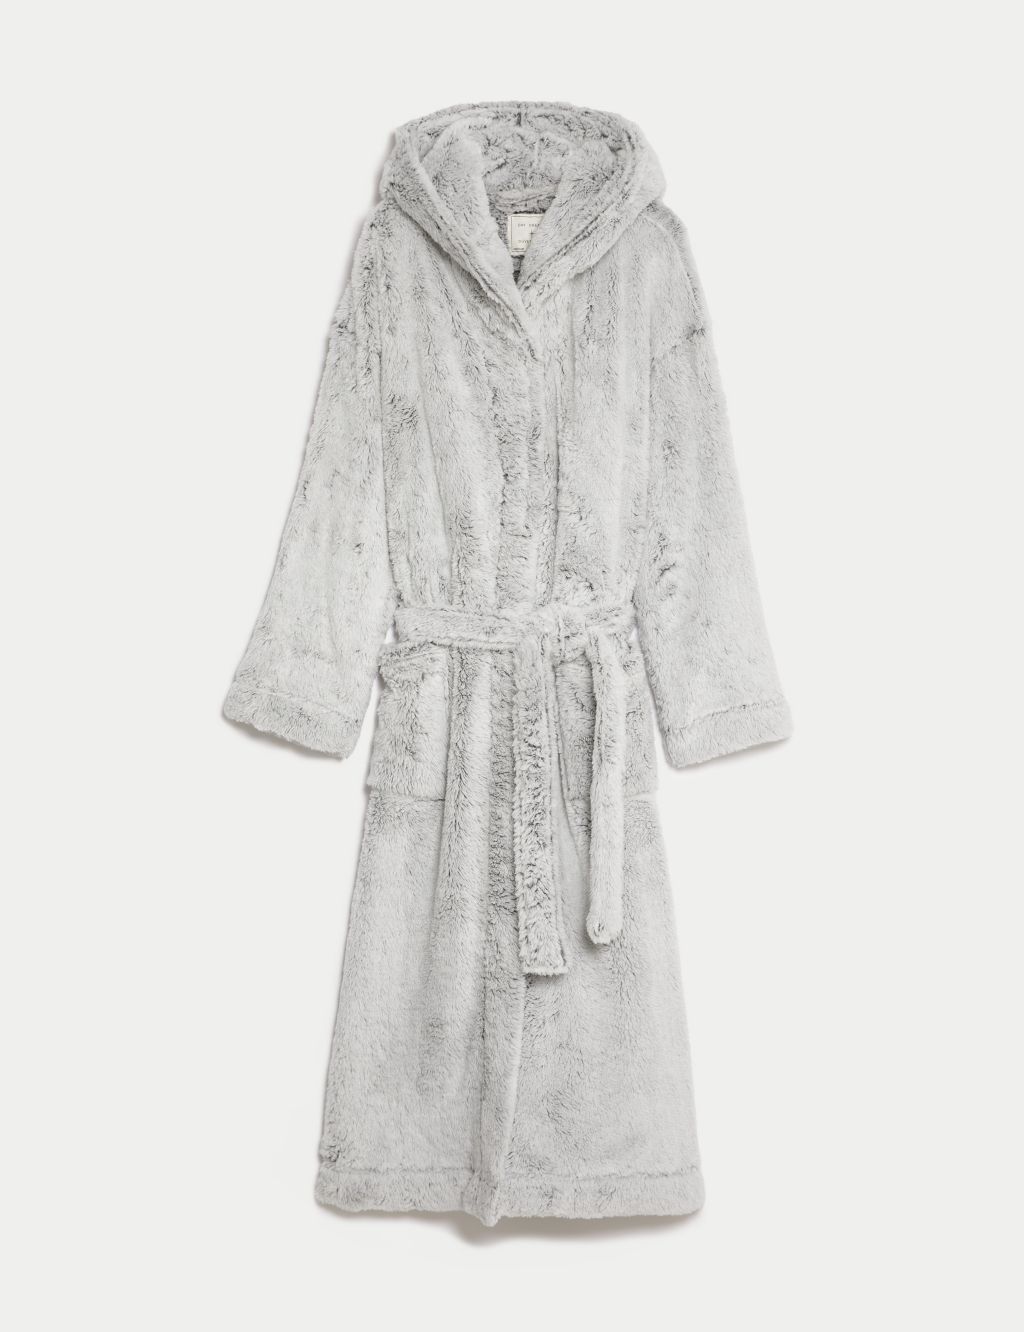 Fleece Hooded Dressing Gown image 2